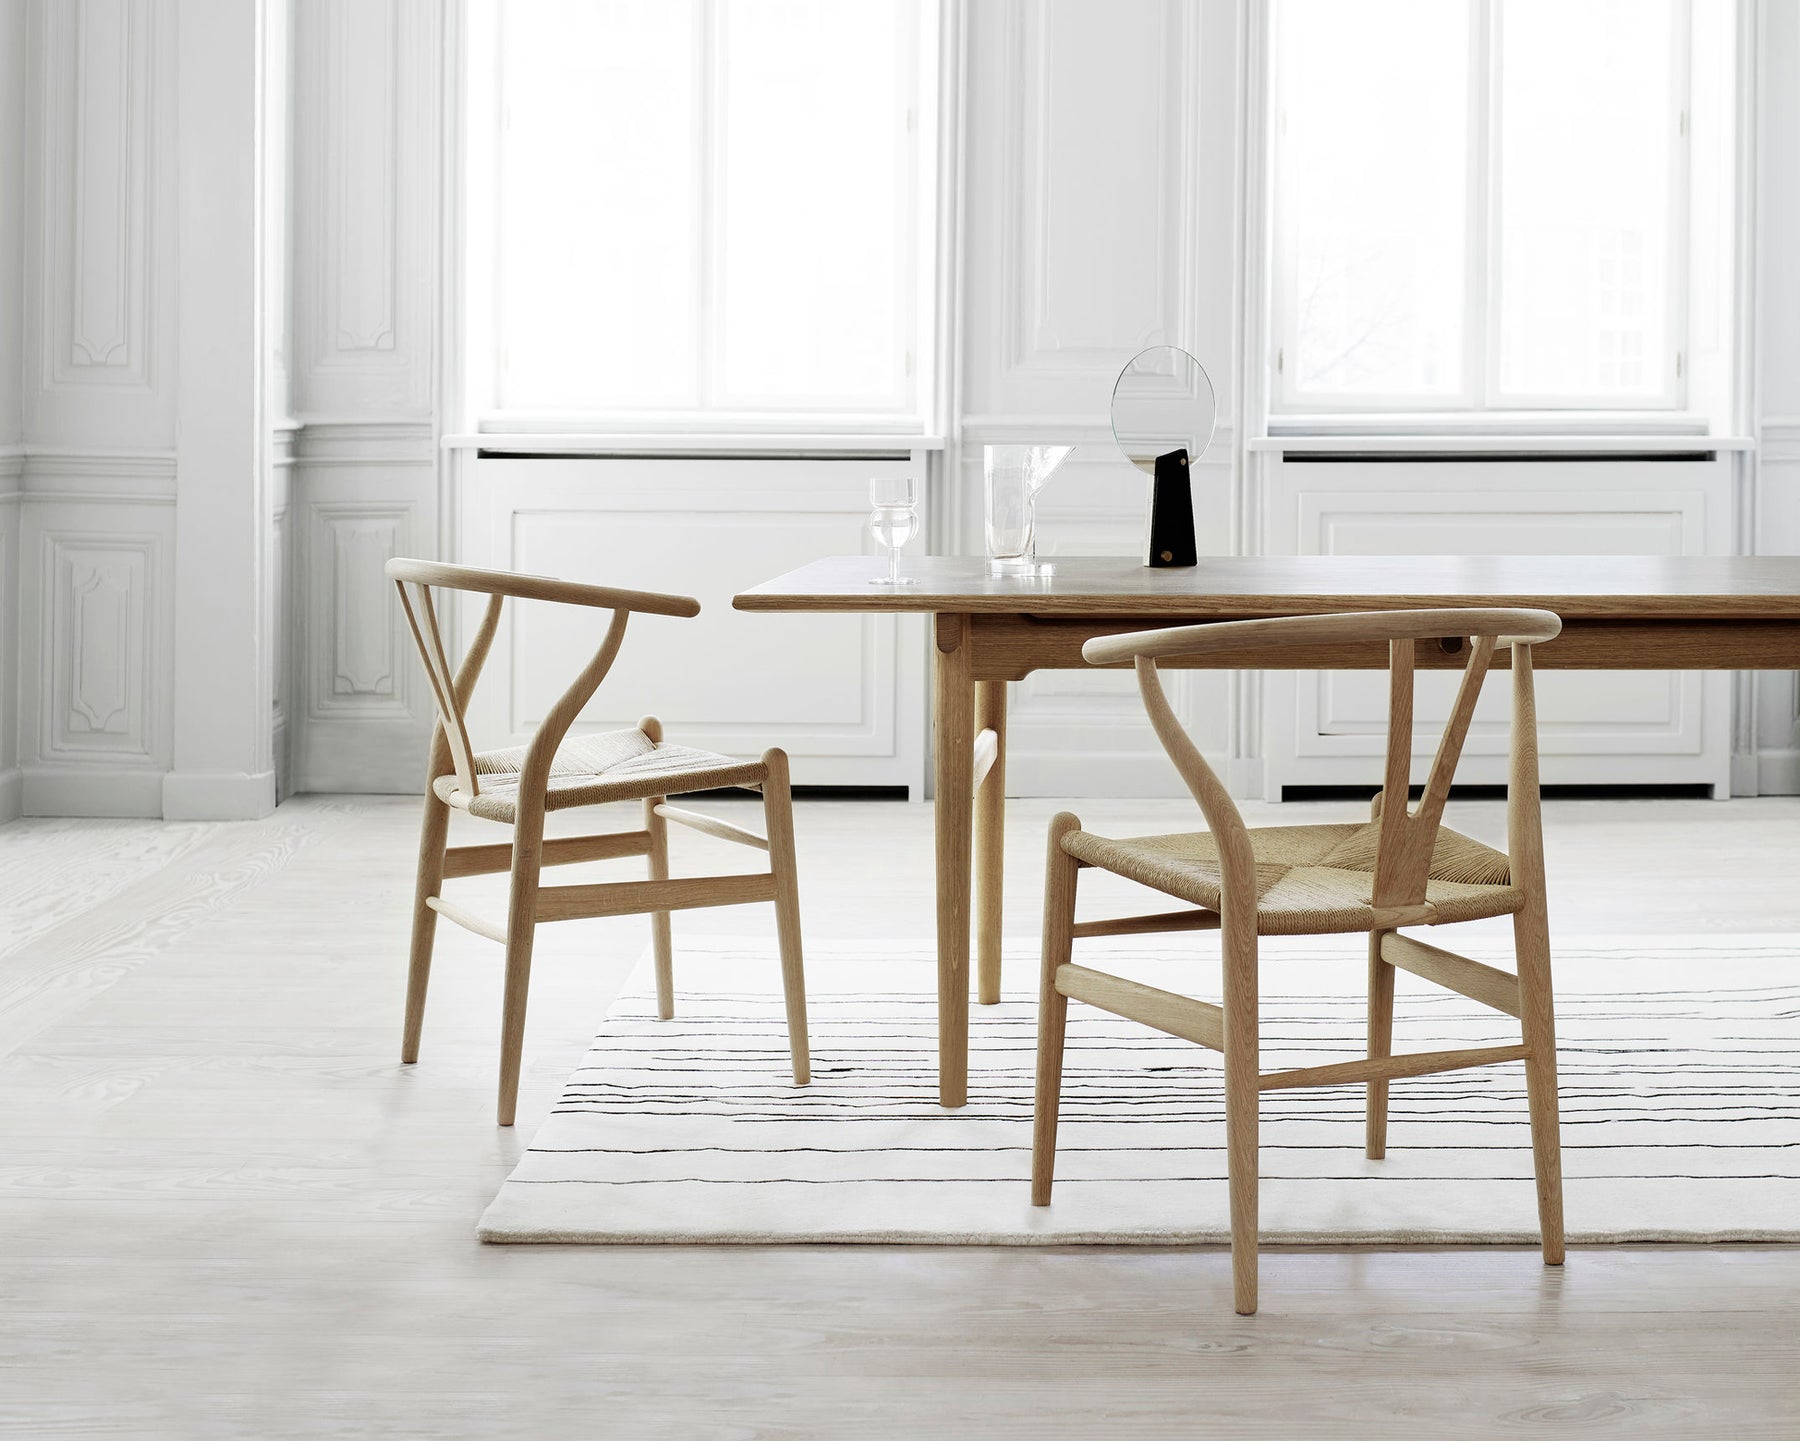 Simple Wood Dining Tables | DSHOP